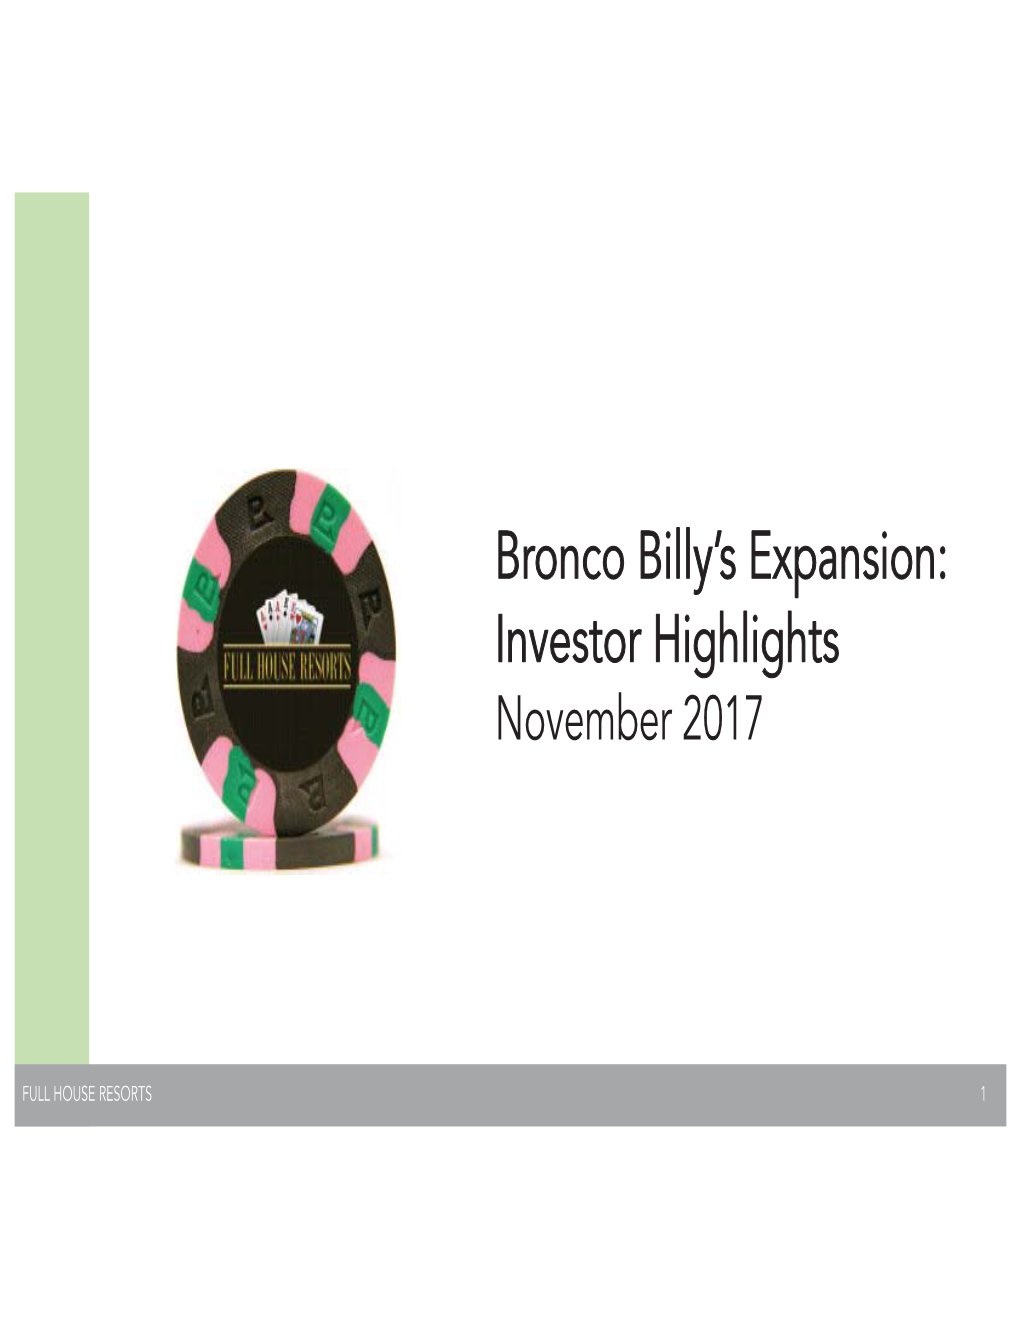 Bronco Billy's Expansion